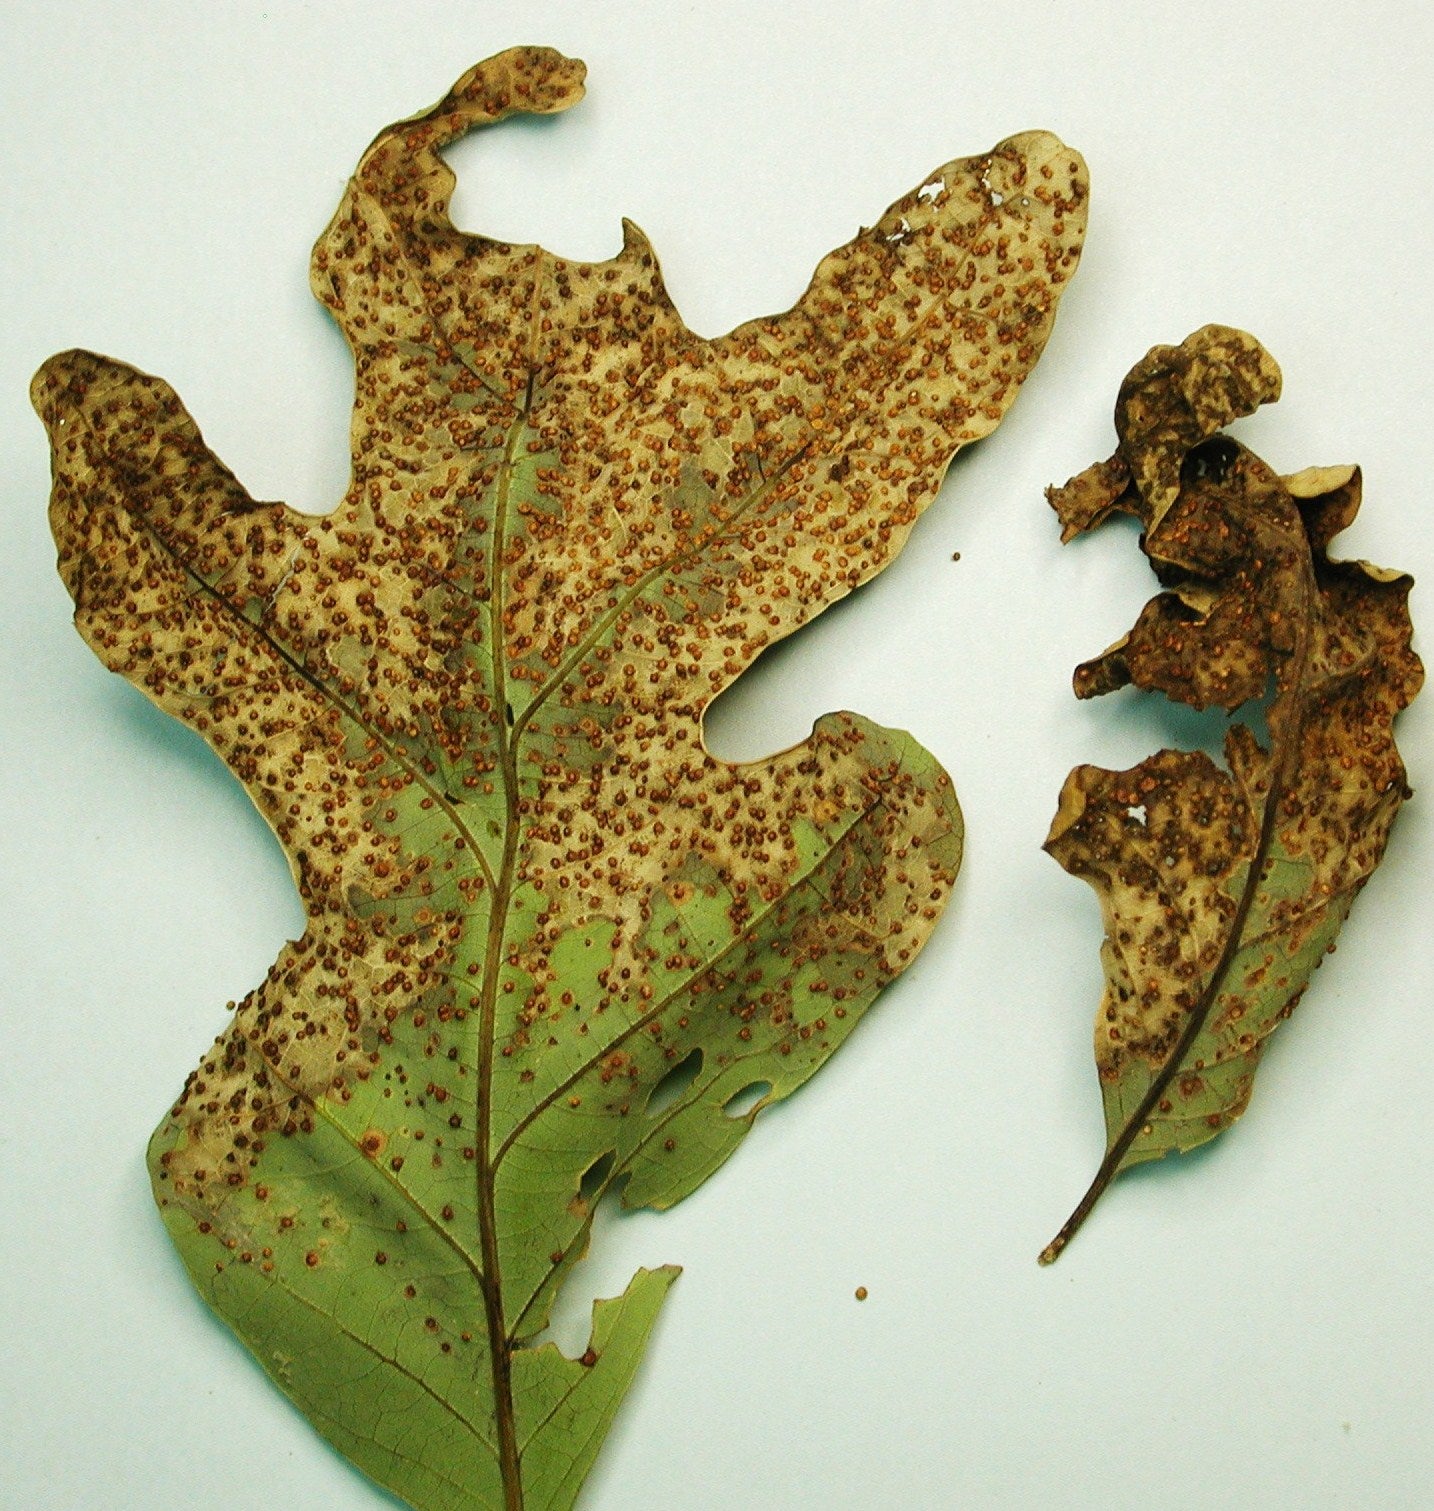 Two oak oak leaves with small brown growths dotted over most of them